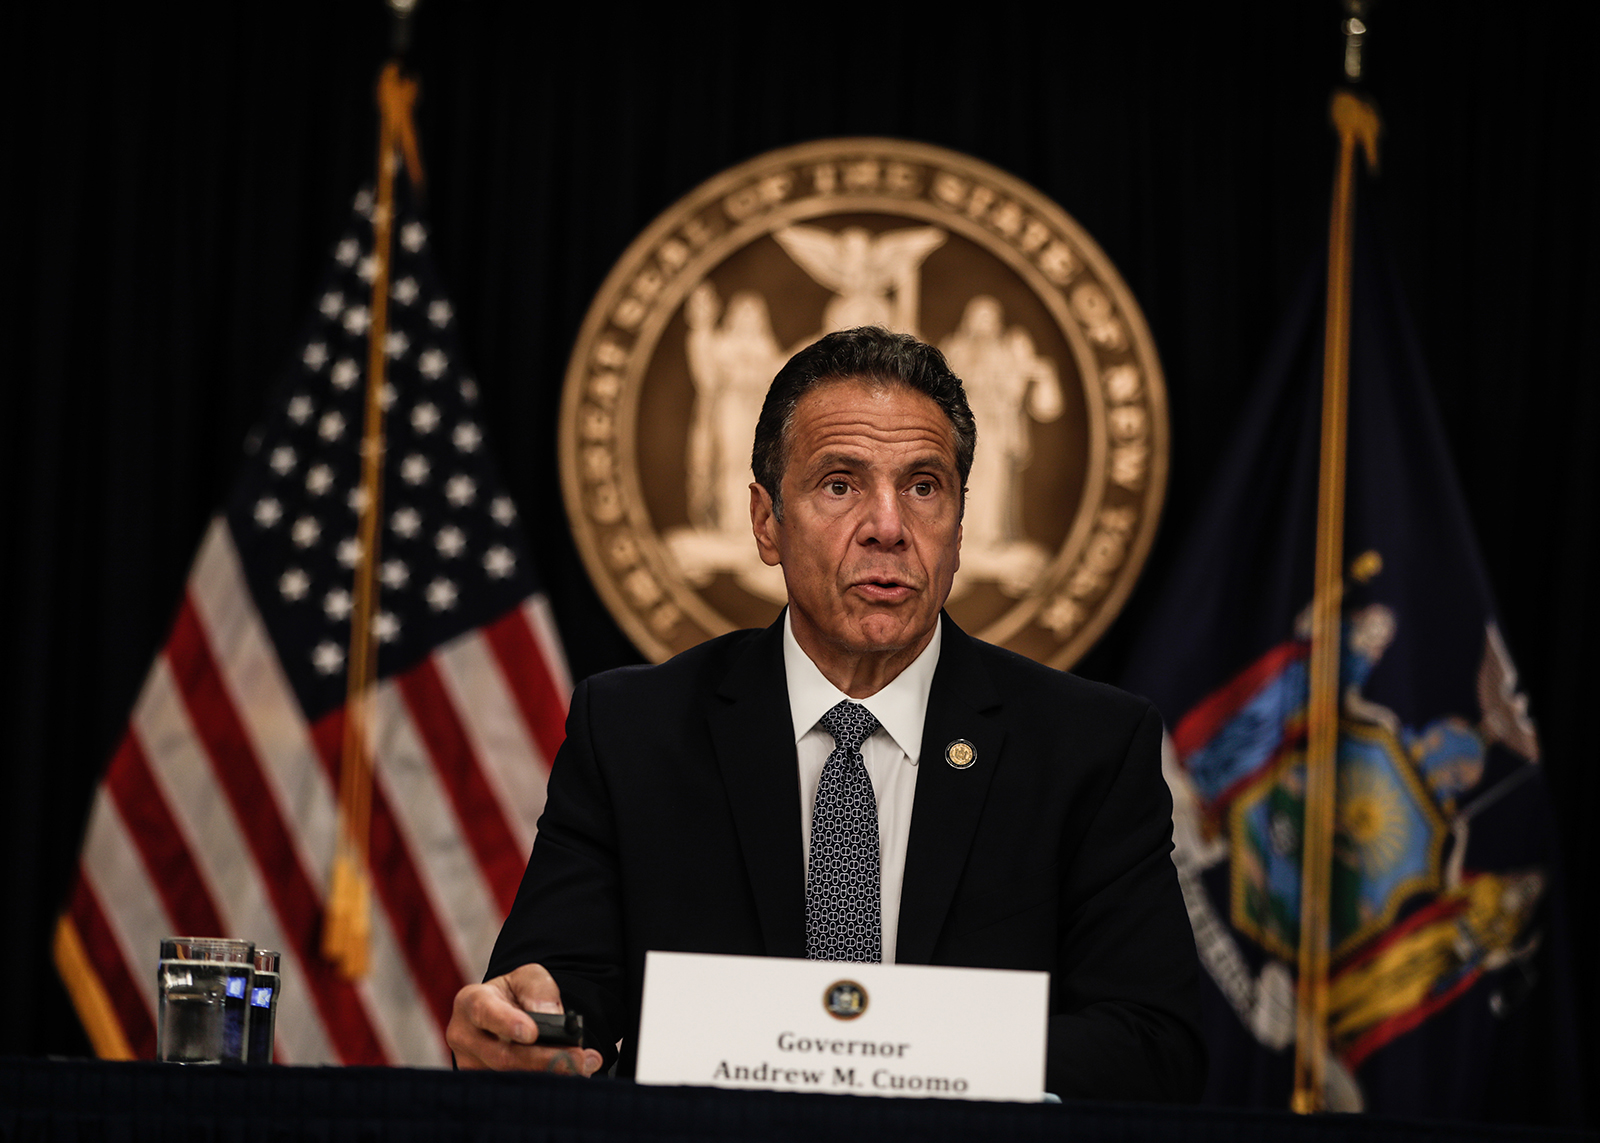 New York Gov. Andrew Cuomo speaks at a news conference in New York on July 1.